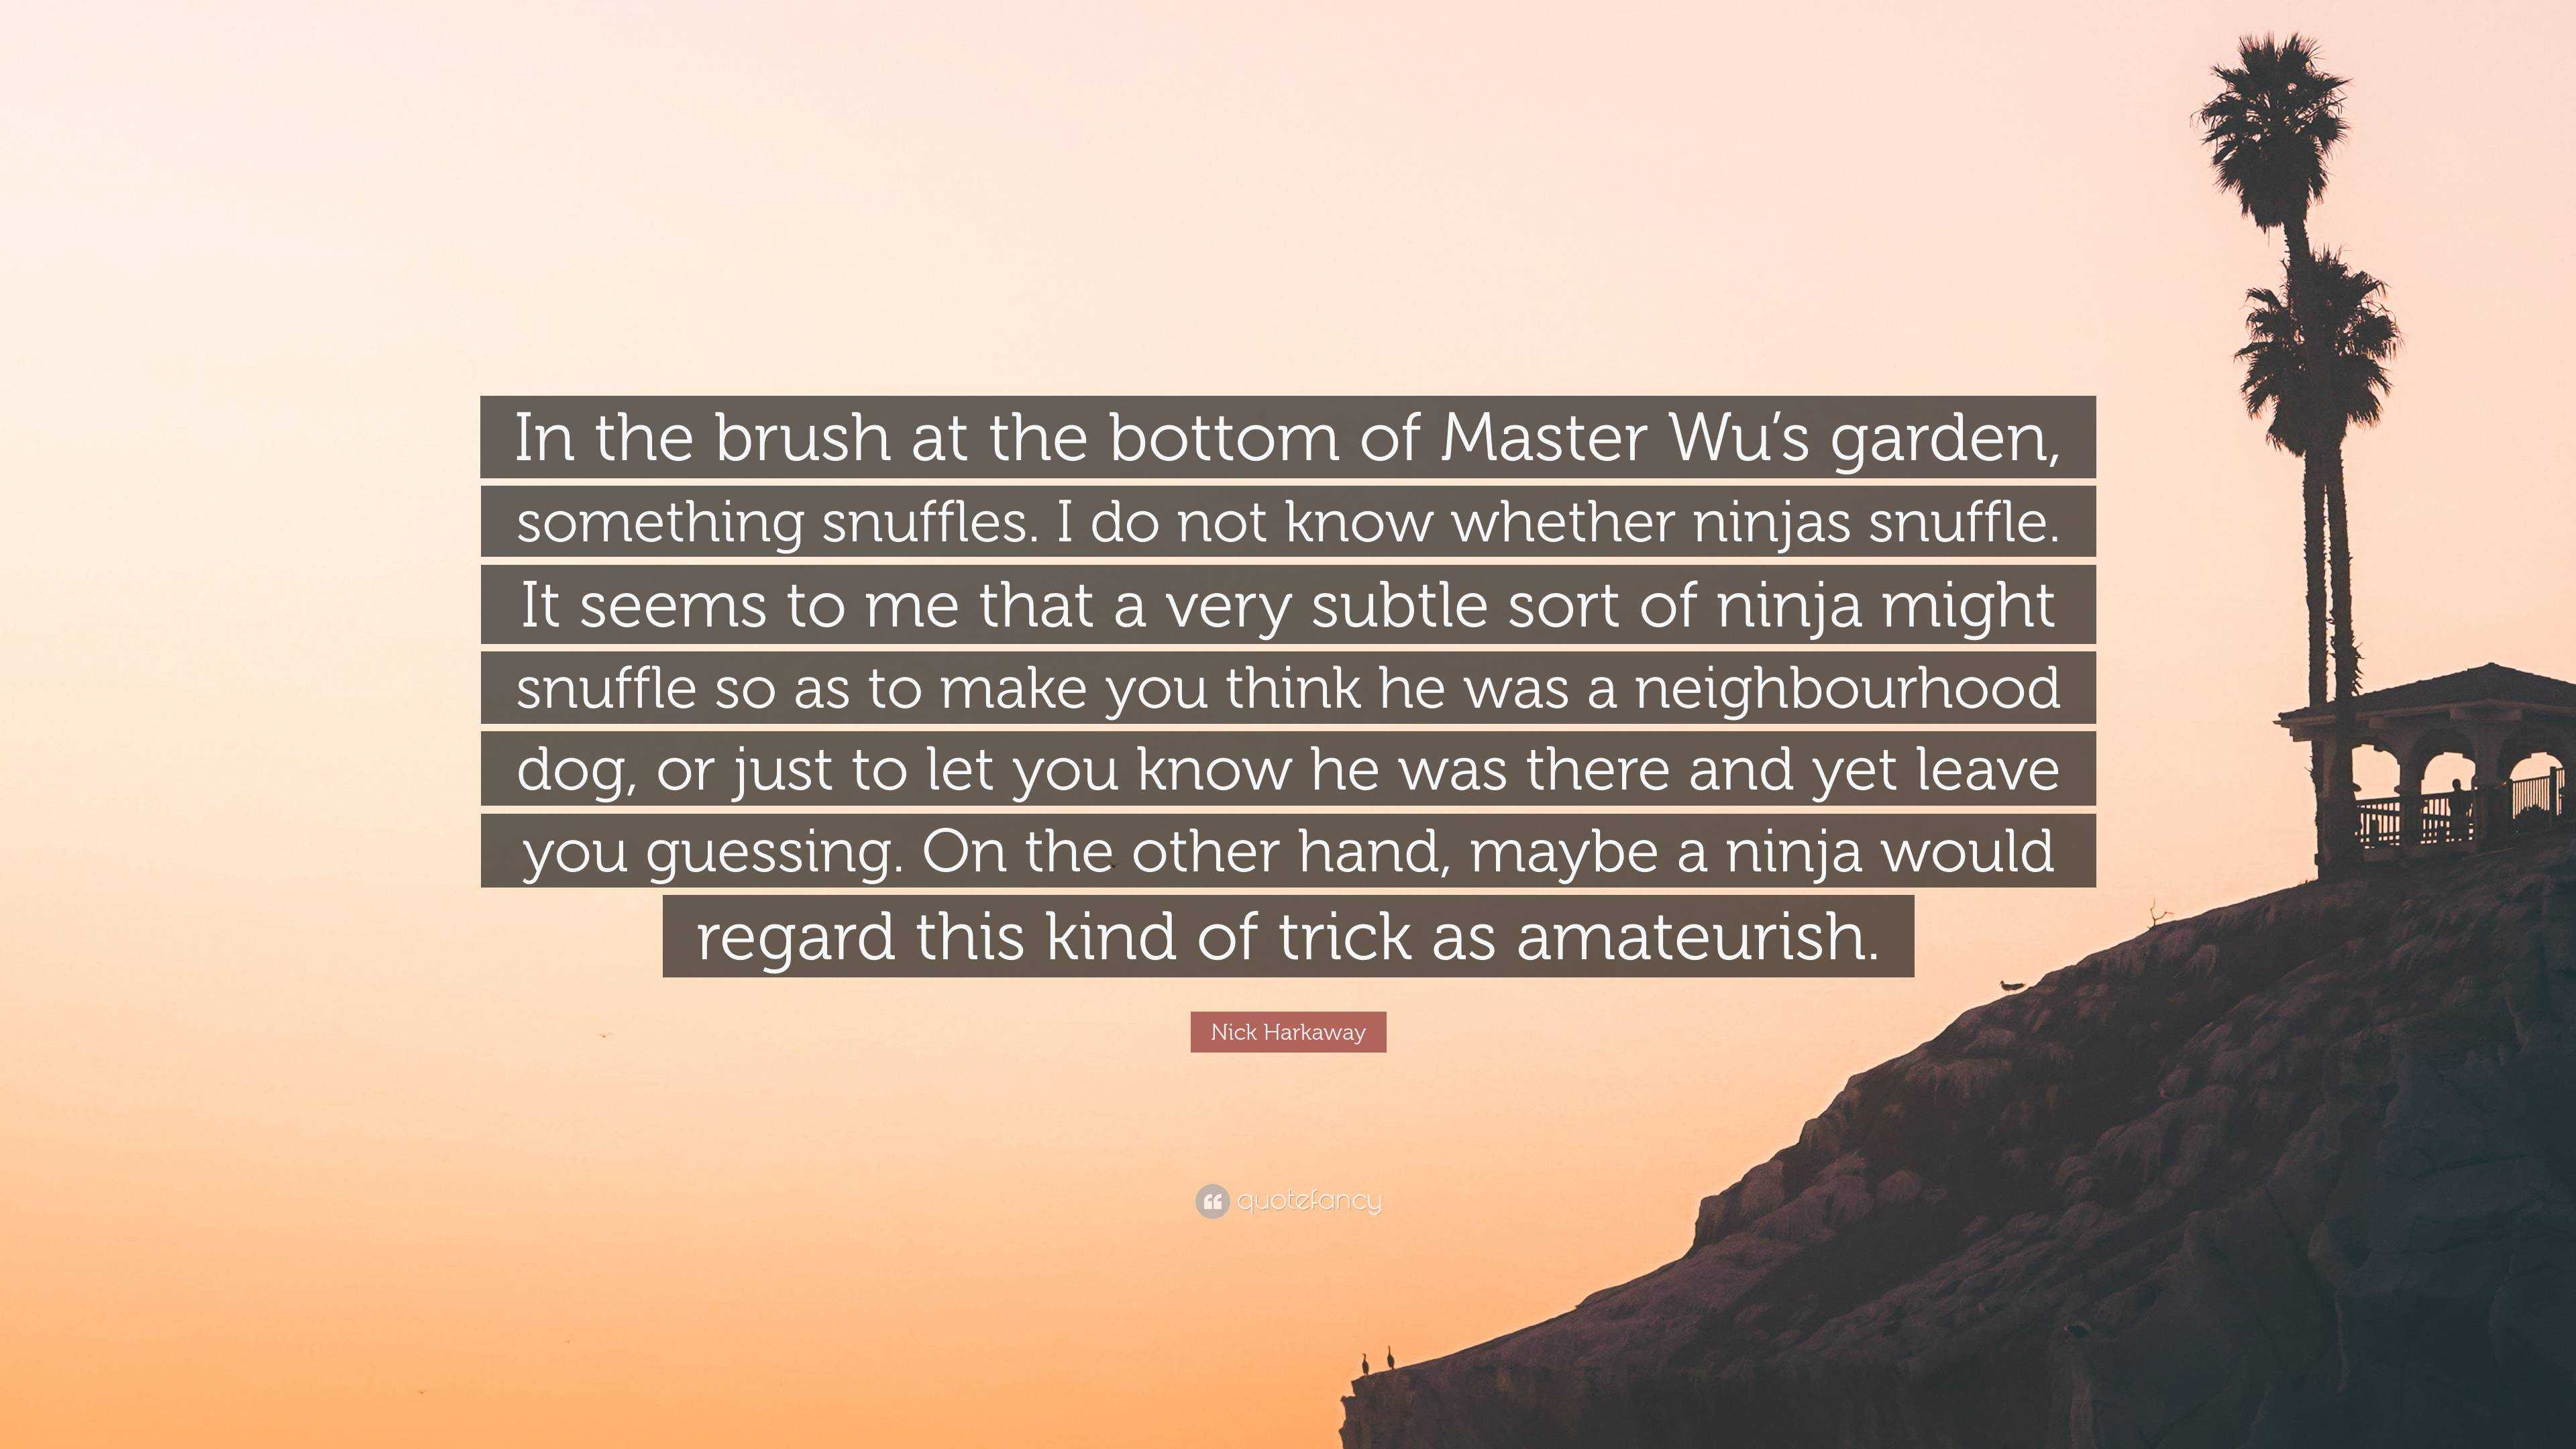 https://quotefancy.com/media/wallpaper/3840x2160/6707139-Nick-Harkaway-Quote-In-the-brush-at-the-bottom-of-Master-Wu-s.jpg